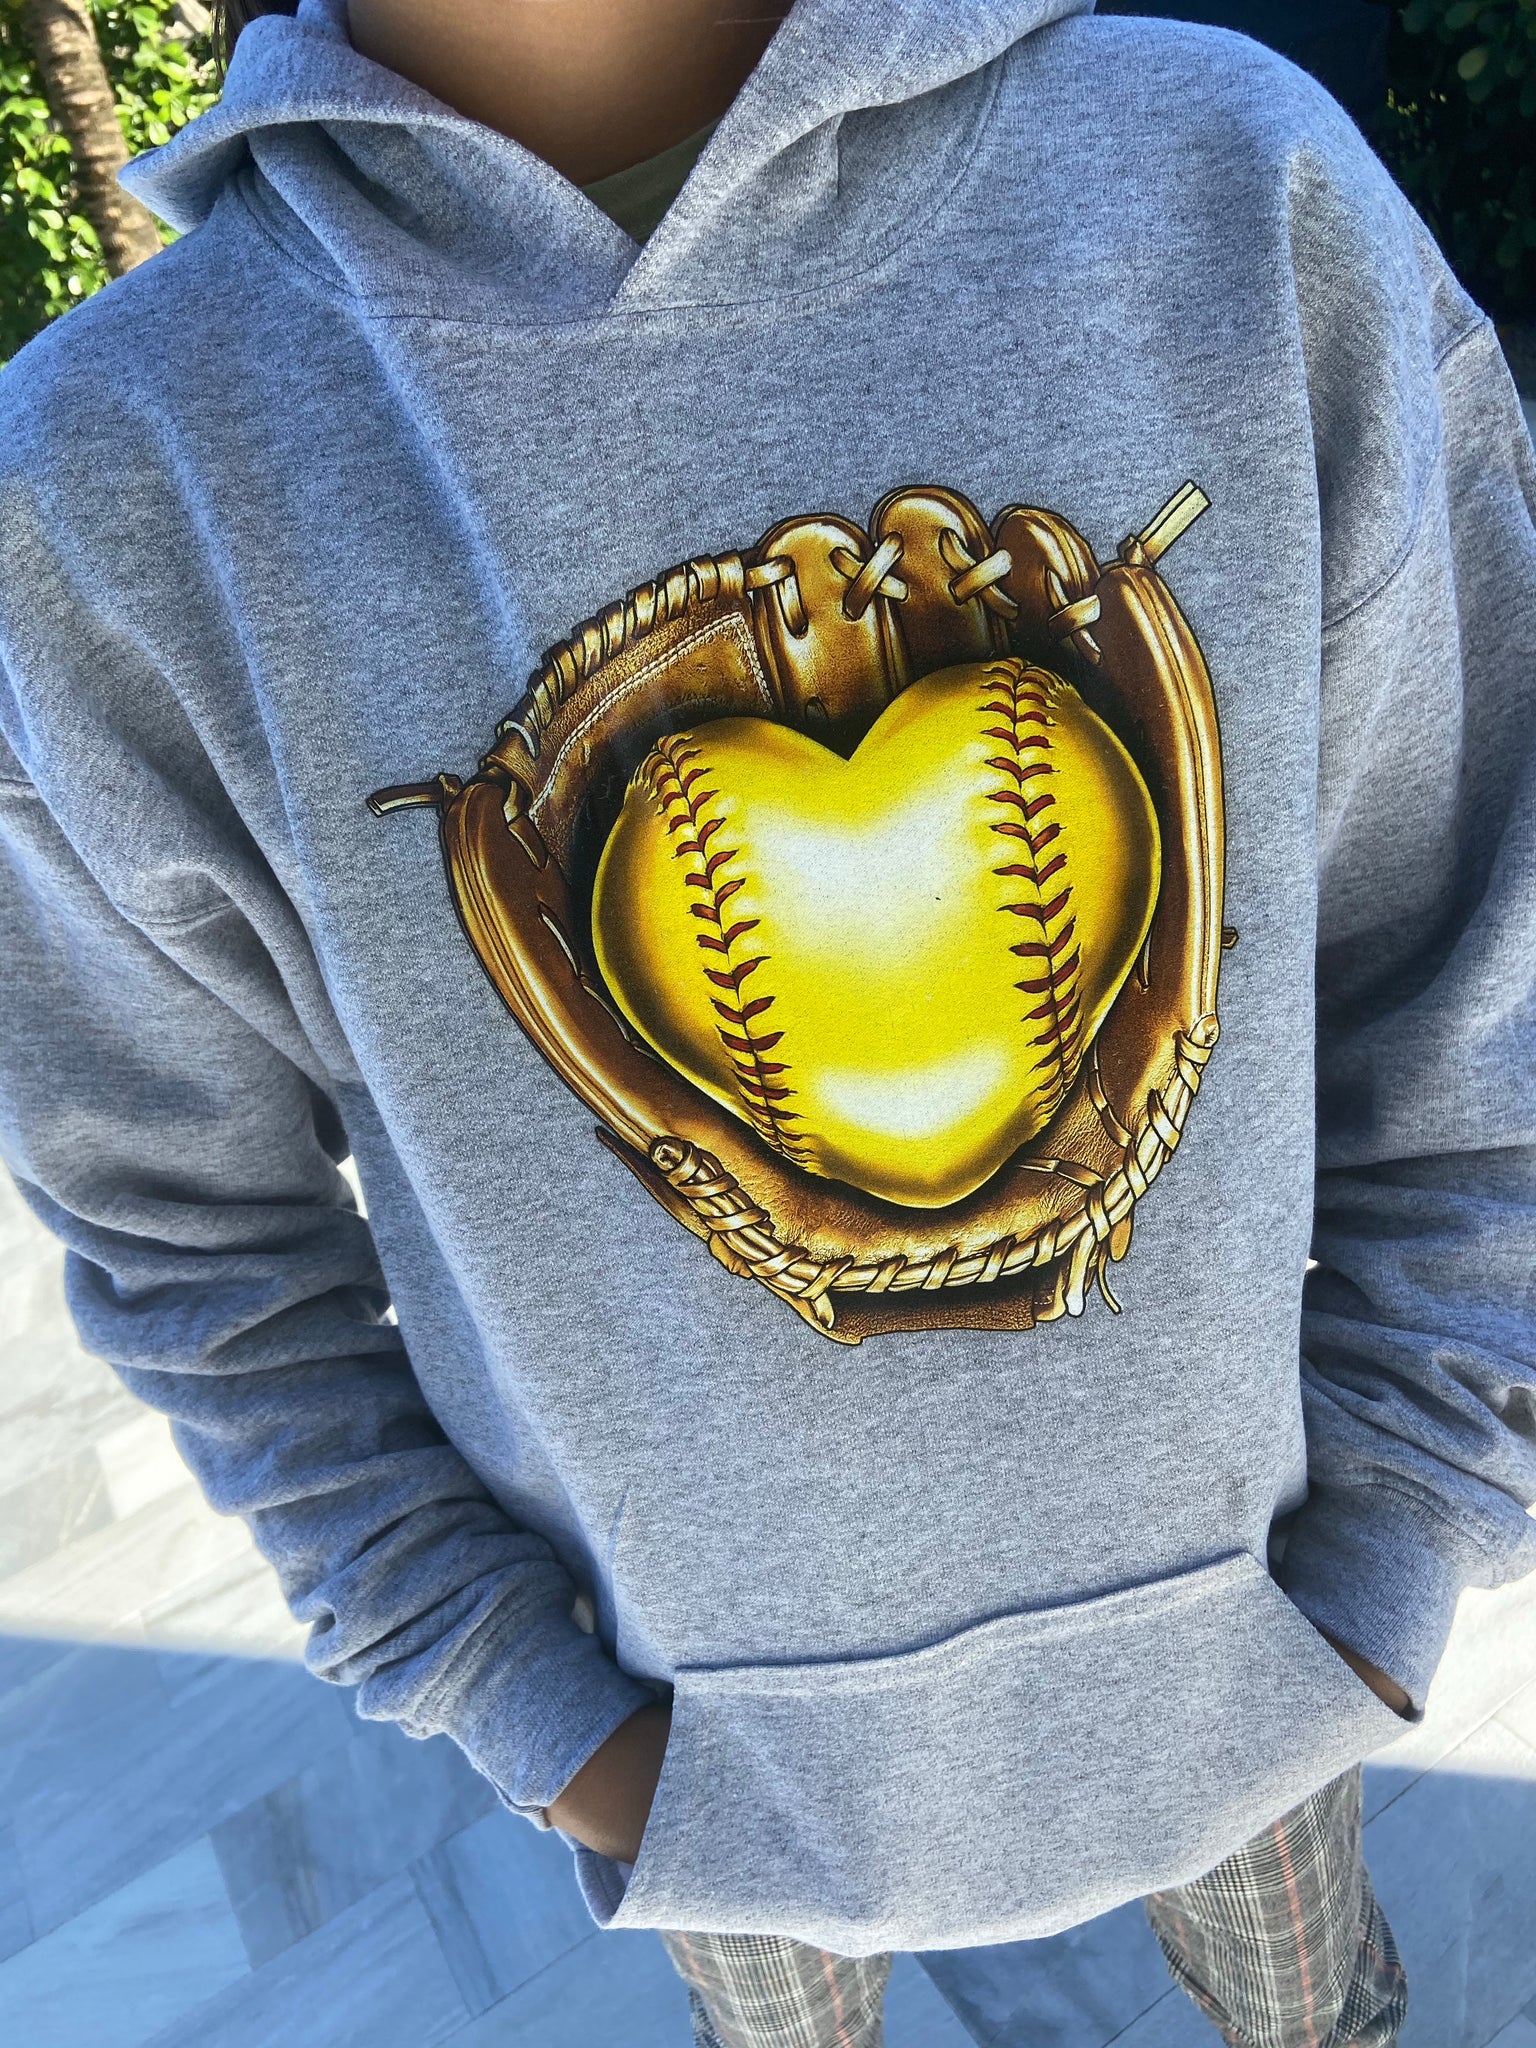 Hoodie Softball Heart Glove Fast pitch design Personalized